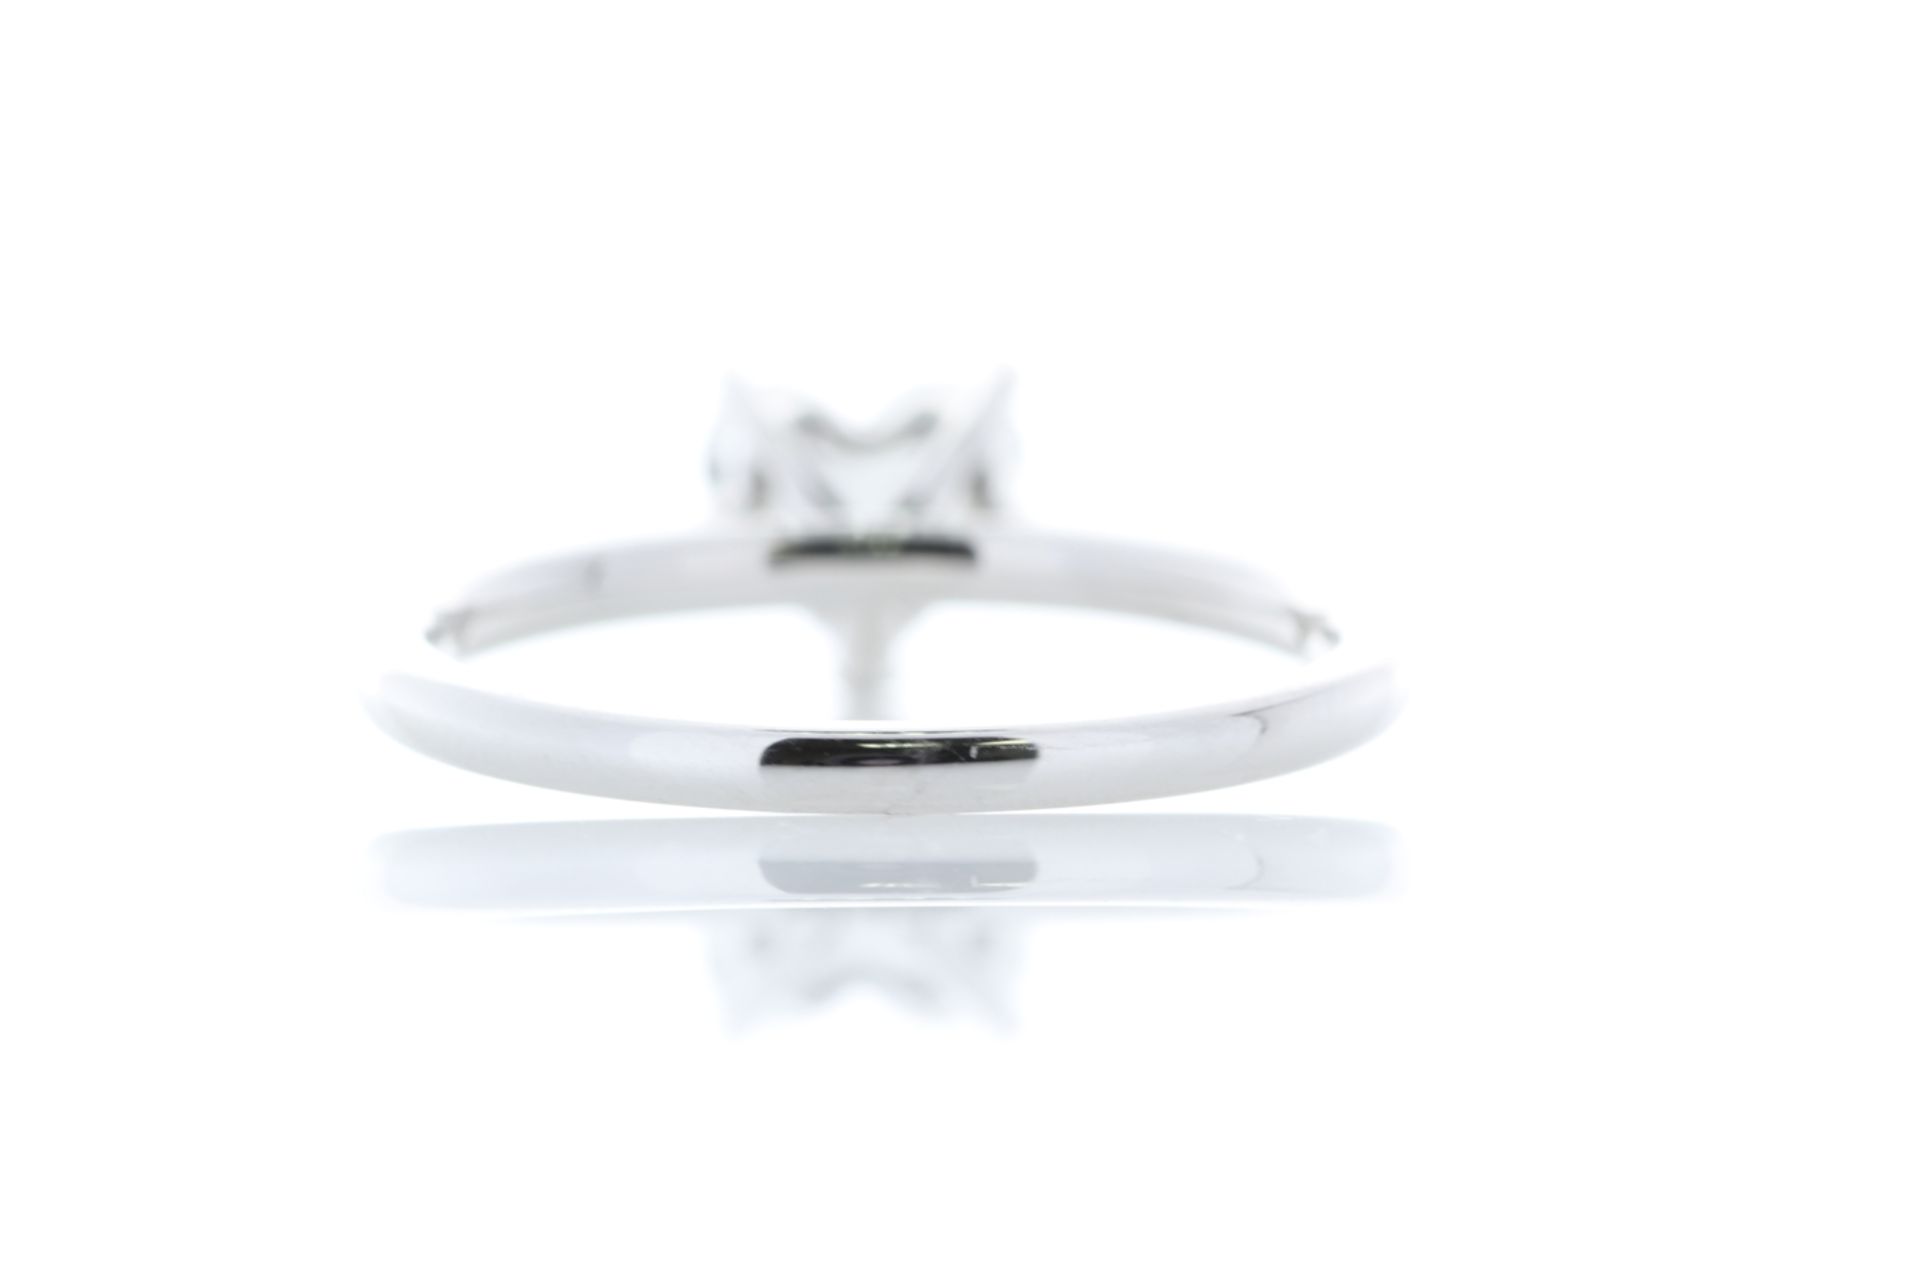 18ct White Gold Heart Shape Diamond Ring 1.17 Carats - Valued By GIE £38,680.00 - This lovely ring - Image 3 of 5